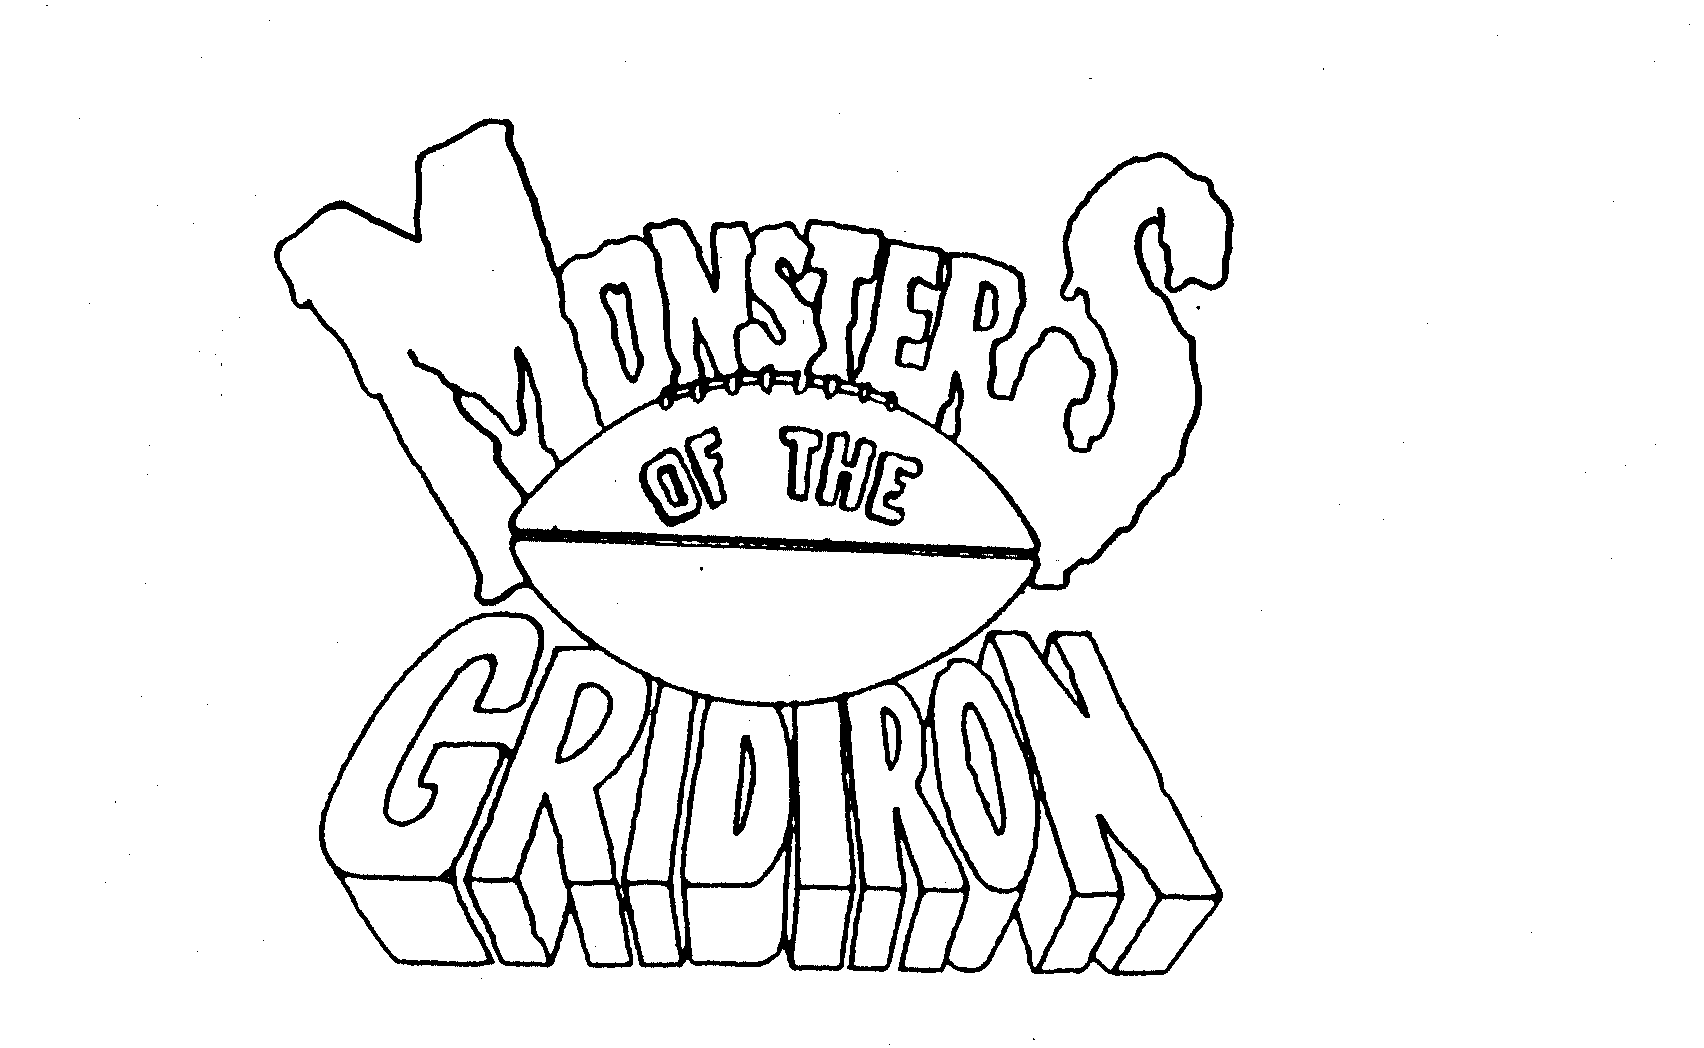  MONSTERS OF THE GRIDIRON